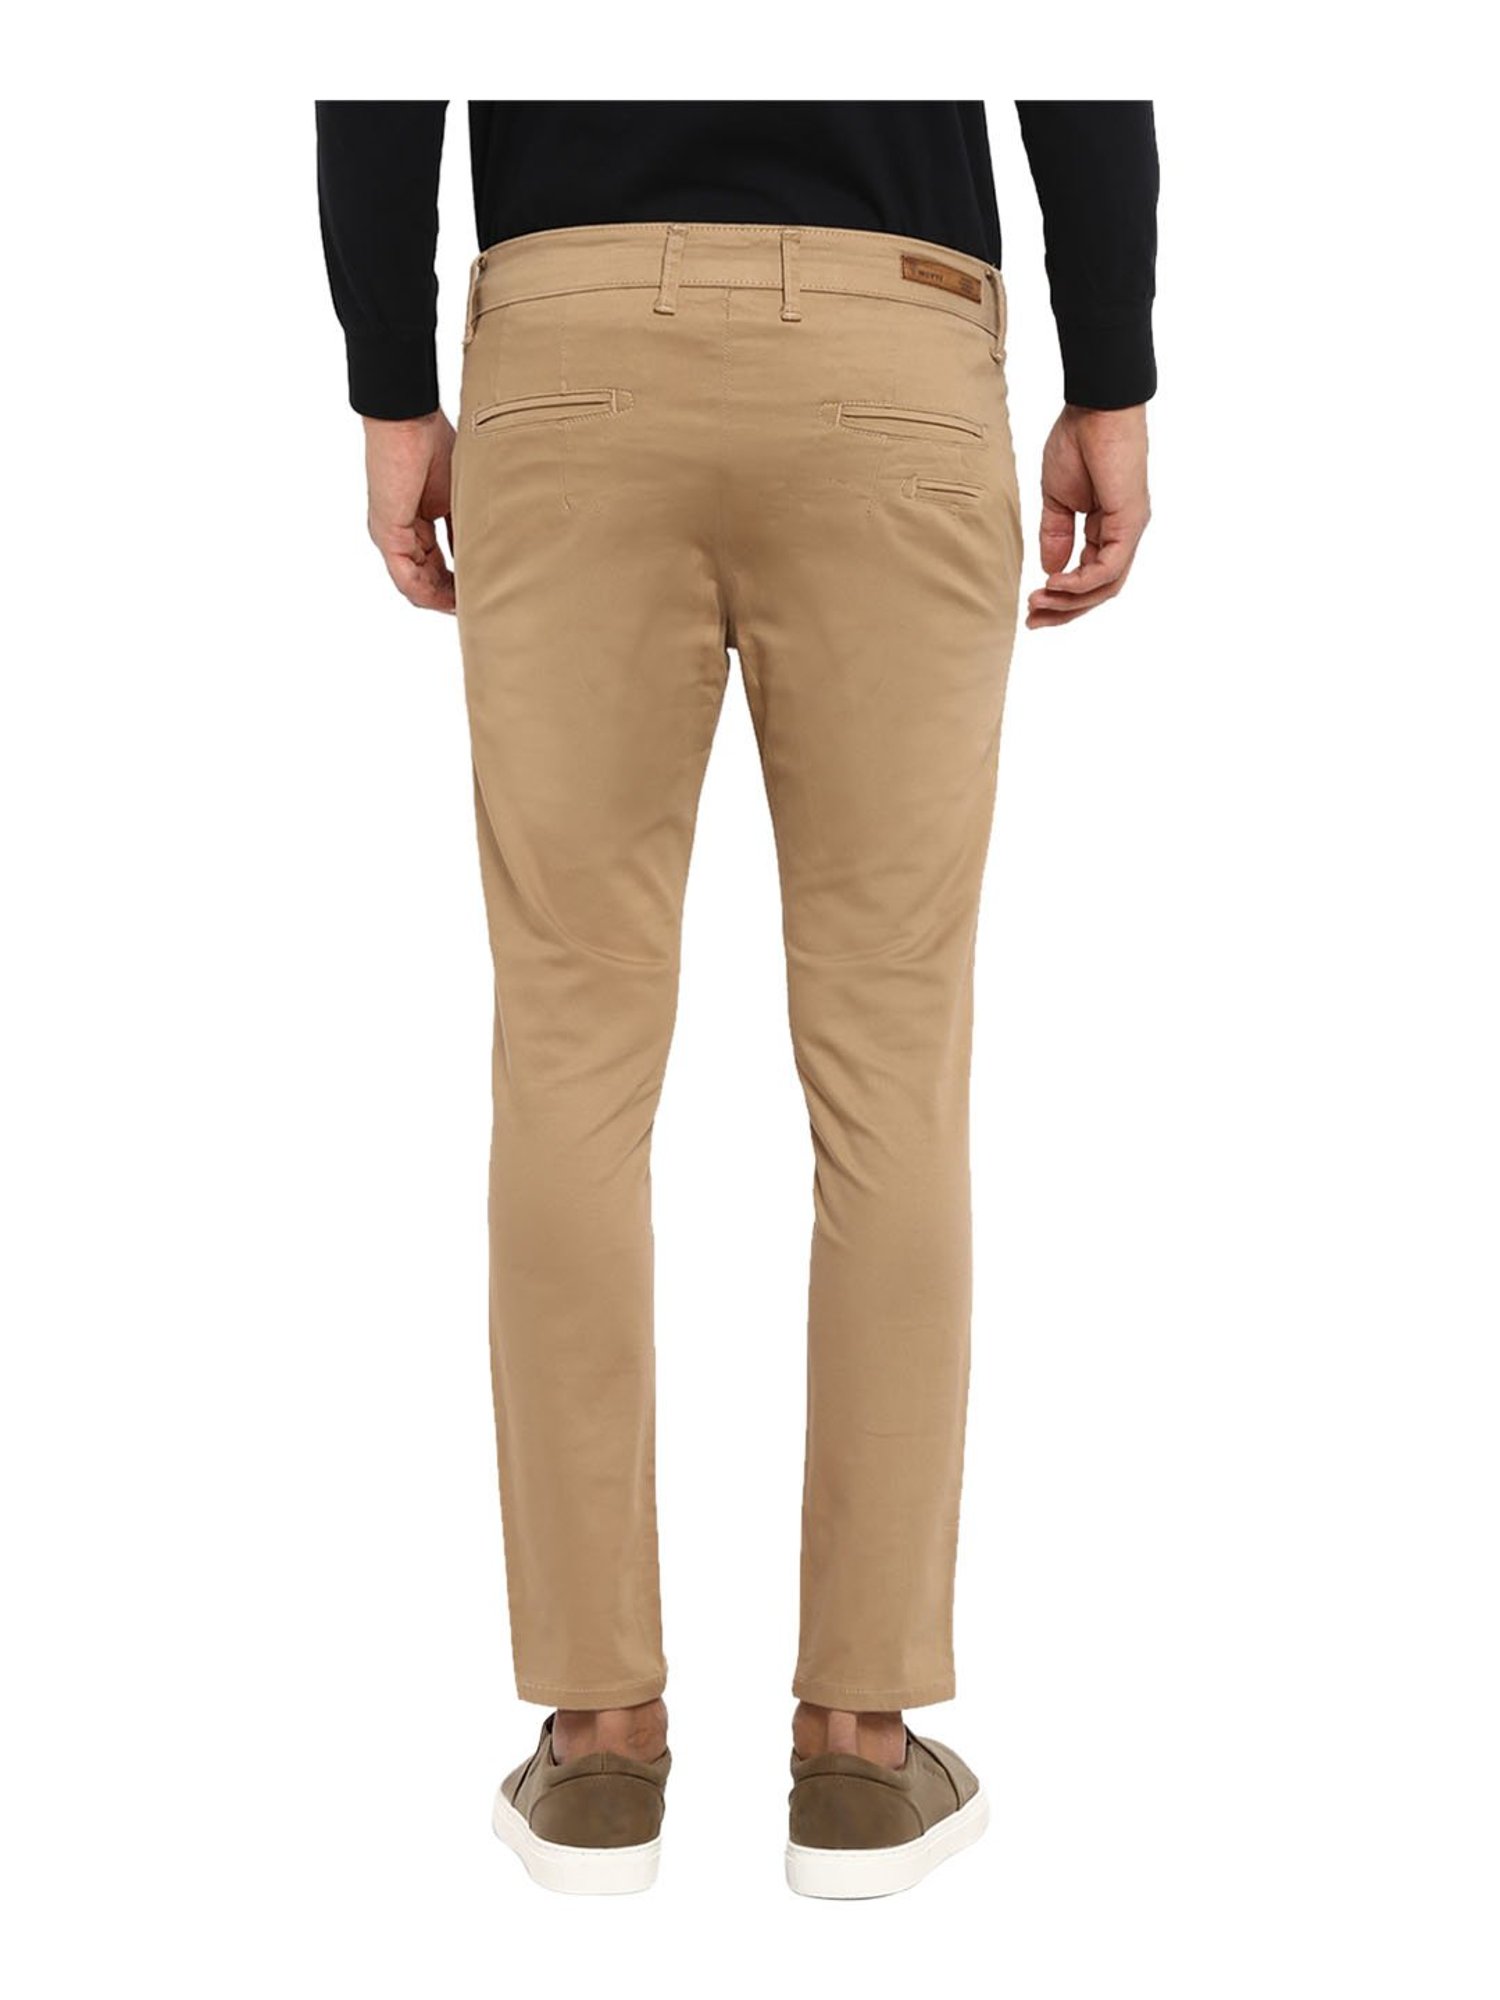 Buy MUFTI Mens Khaki Ankle Length Trousers at Amazonin